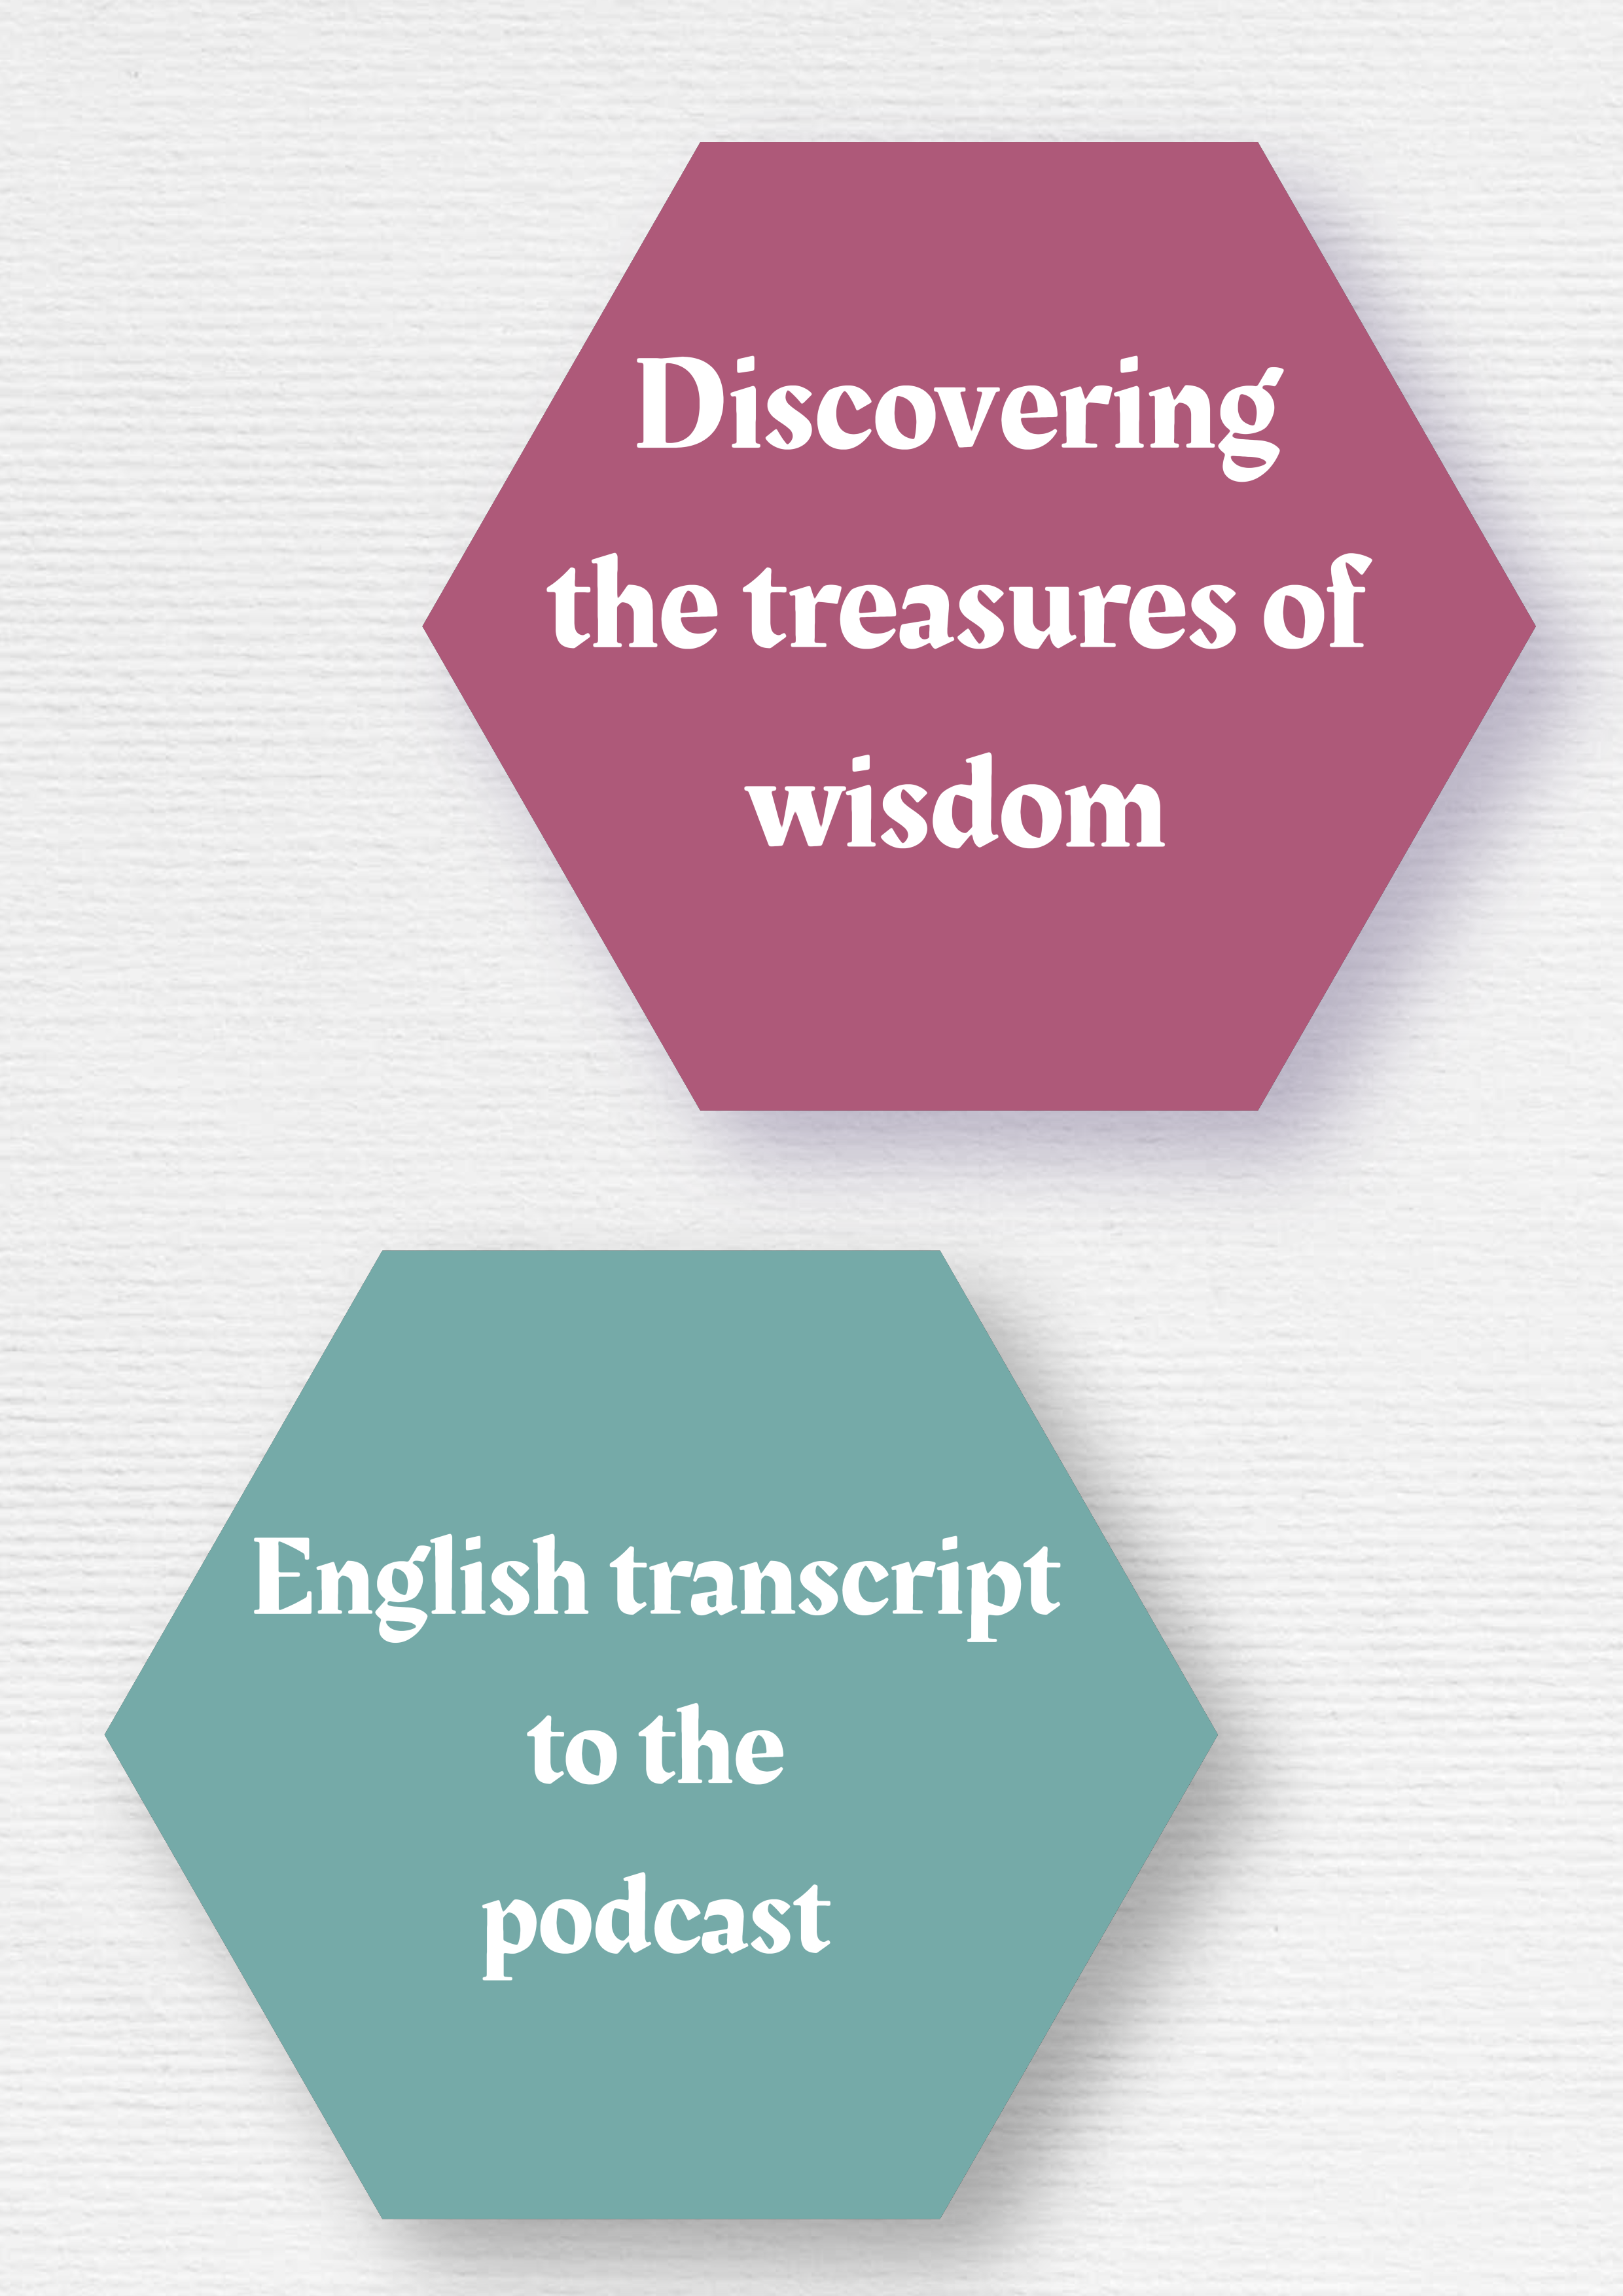 Discovering the treasures of wisdom